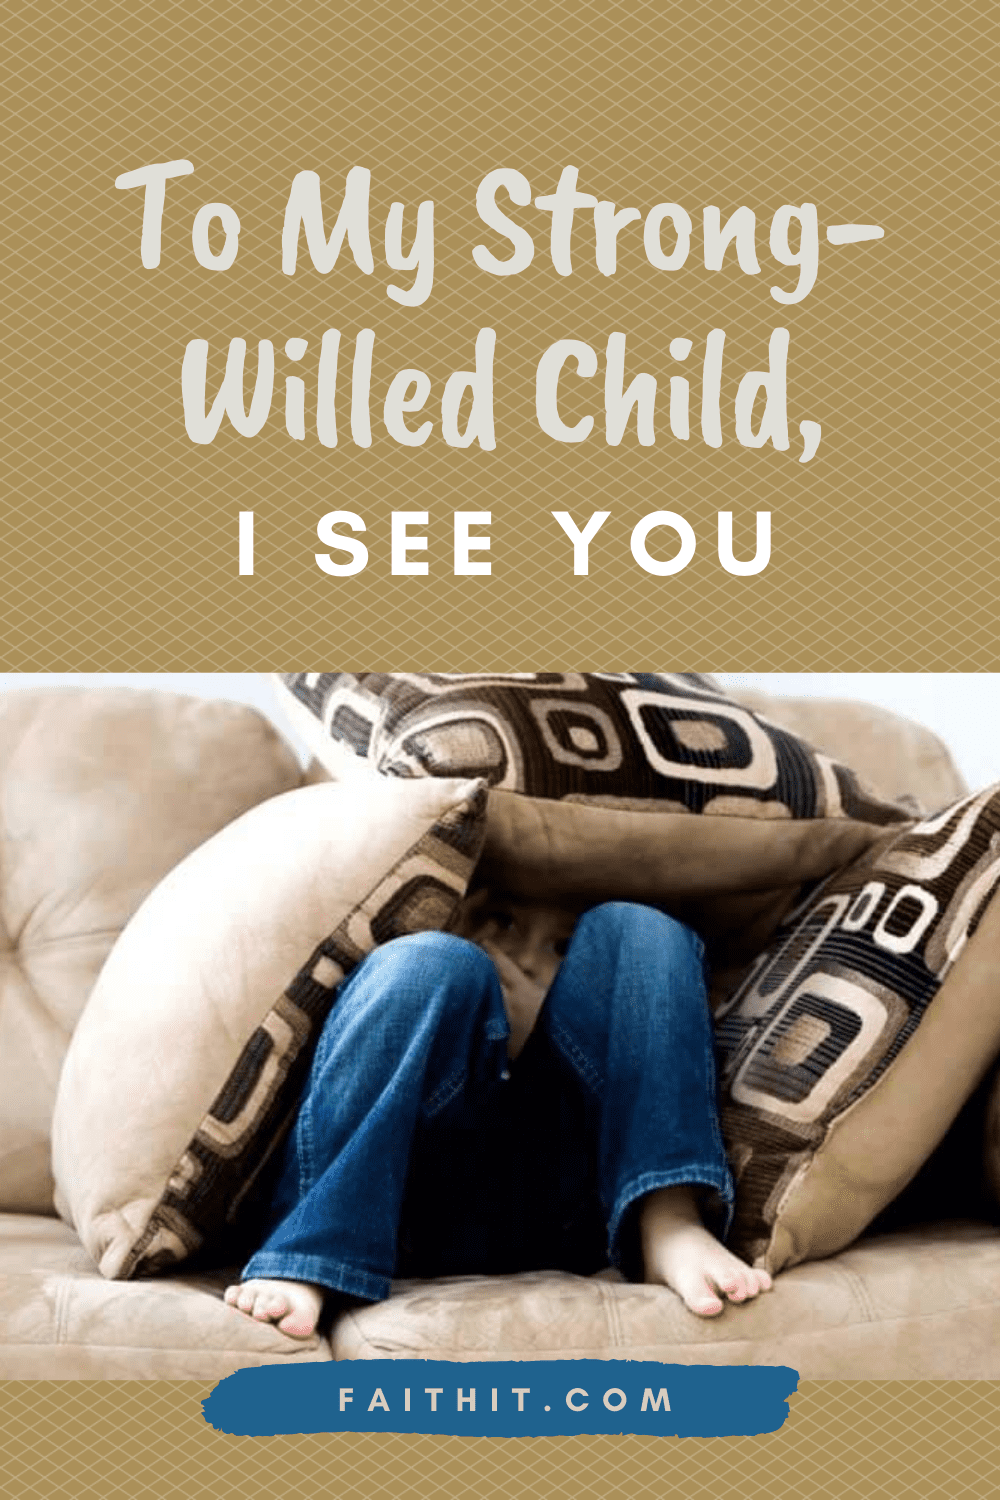 strong-willed child